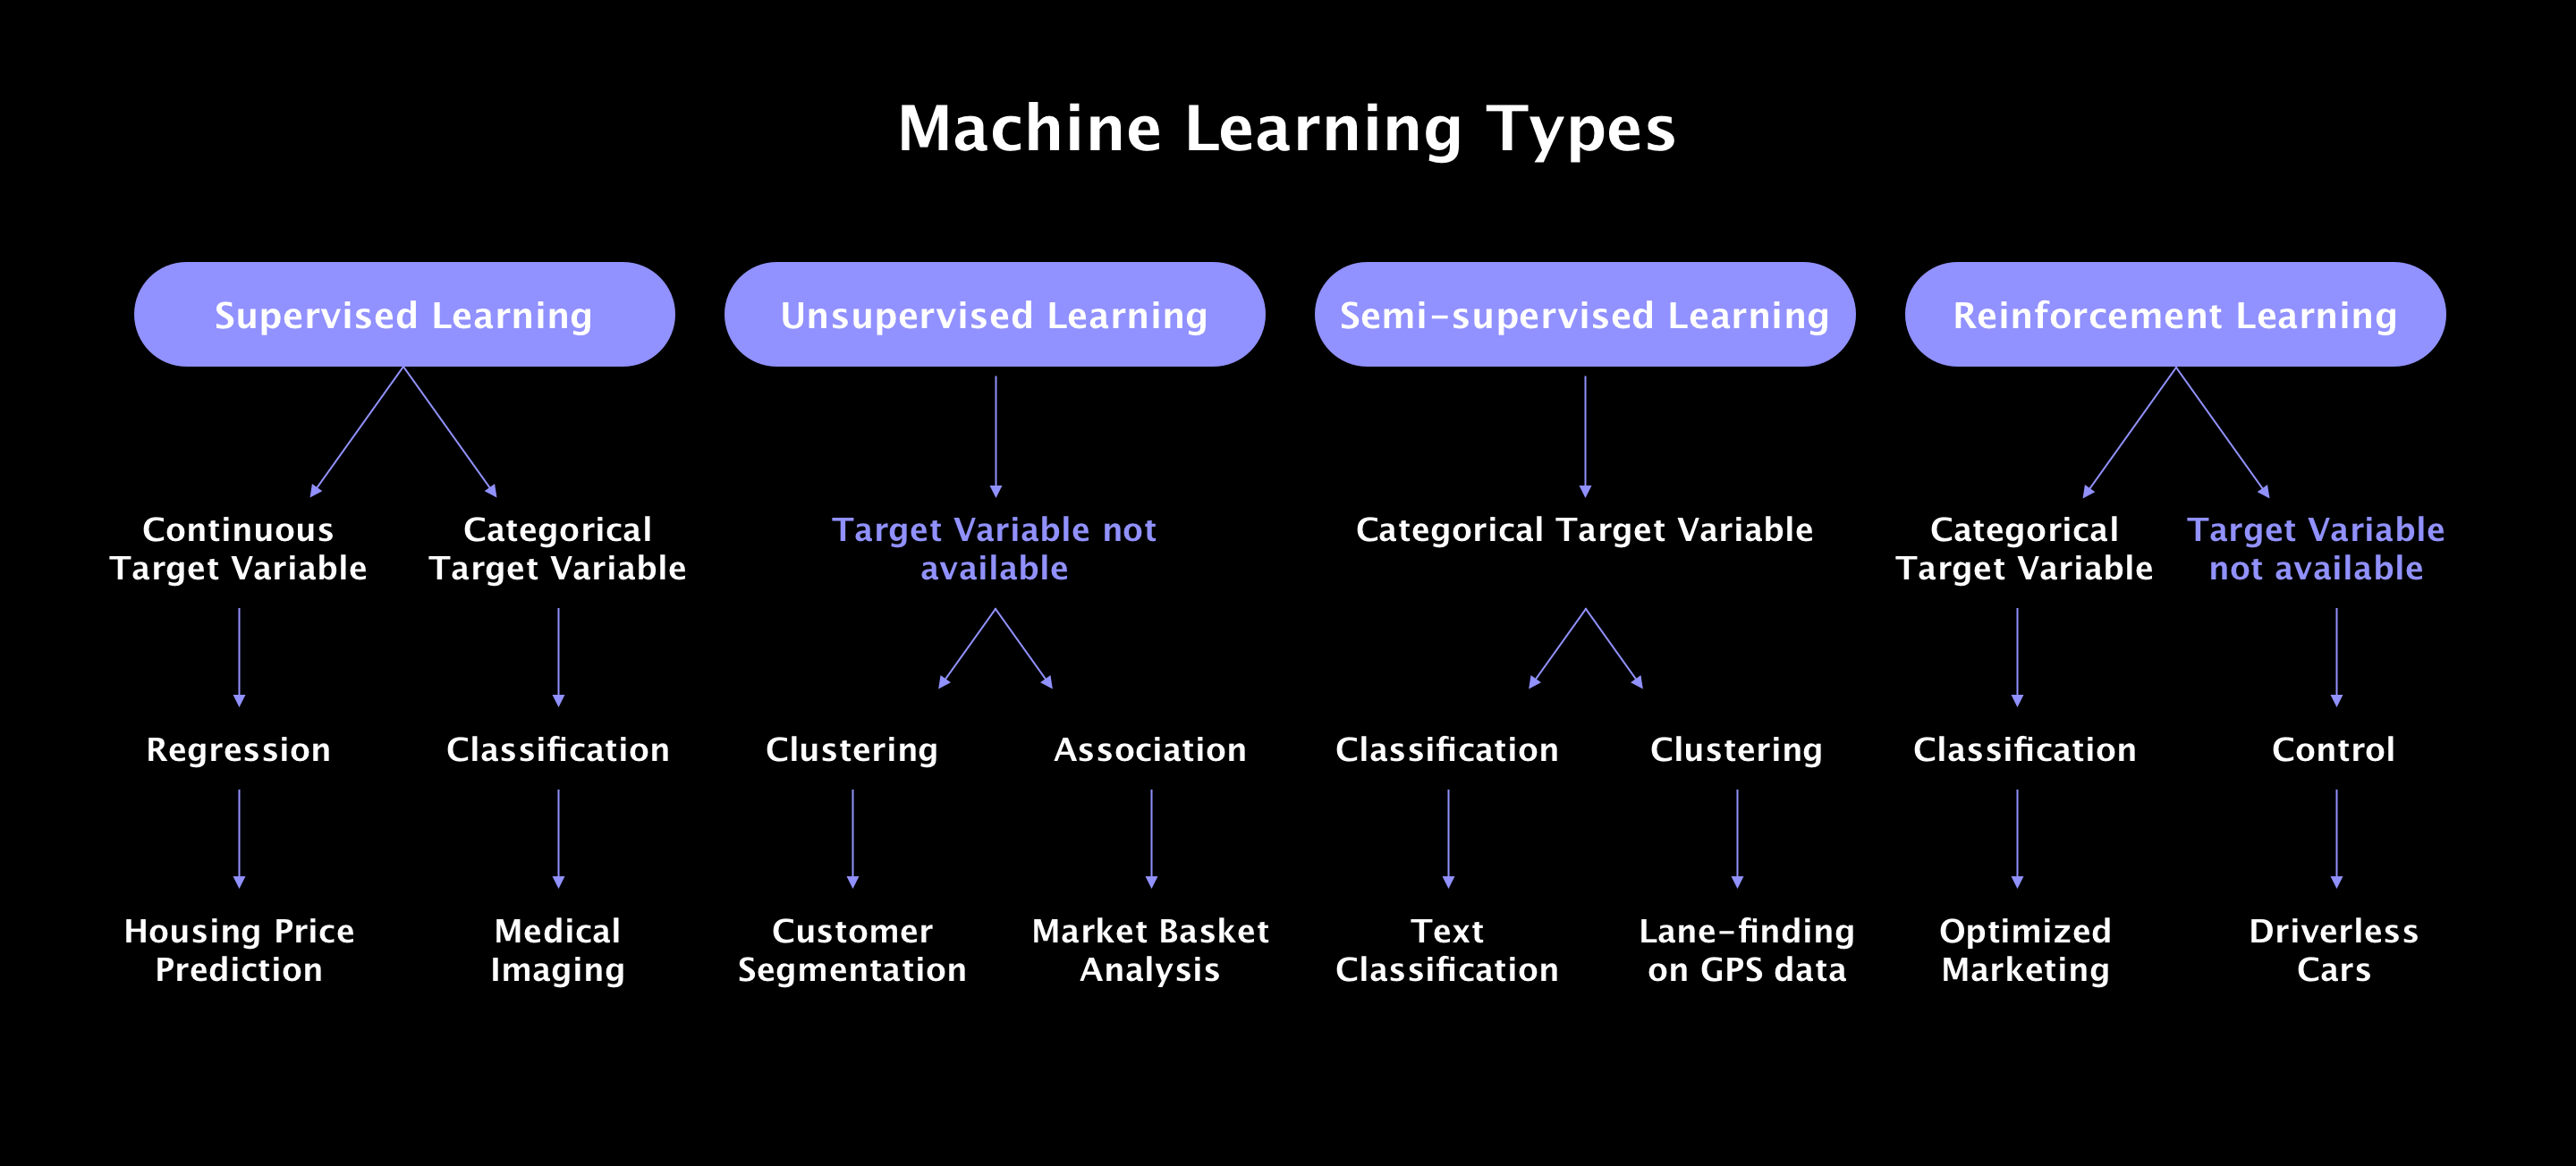 Types of Supervised Machine Learning Techniques